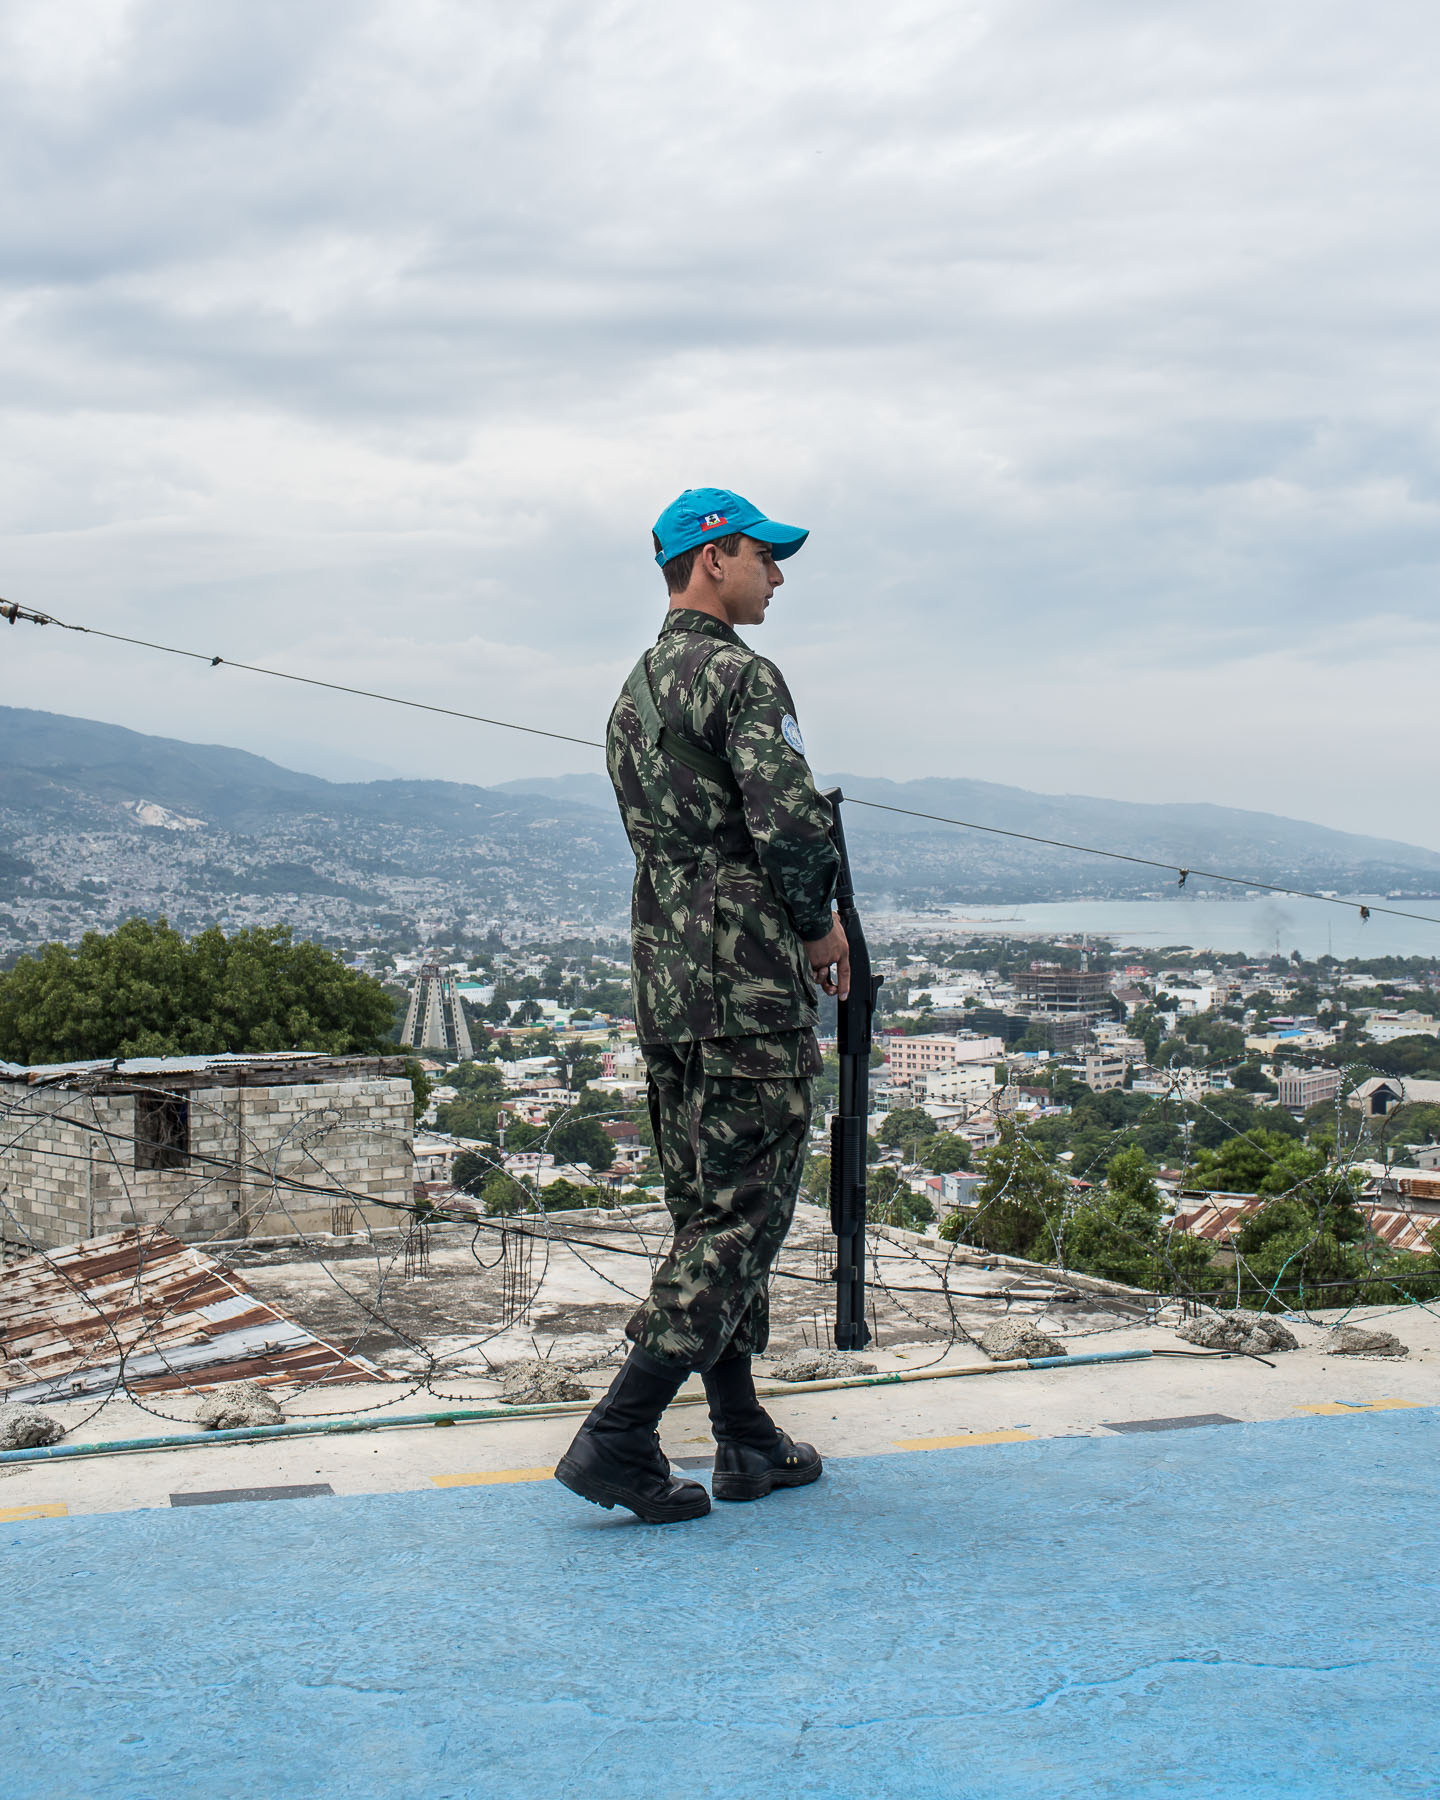  A UN peacekeeping soldier from Brazil, operating under the auspices of MINUSTAH, at his base in Fort National on Tuesday, December 16, 2014 in Port-au-Prince, Haiti. The UN has a controversial record in Haiti, and is extremely unpopular. 